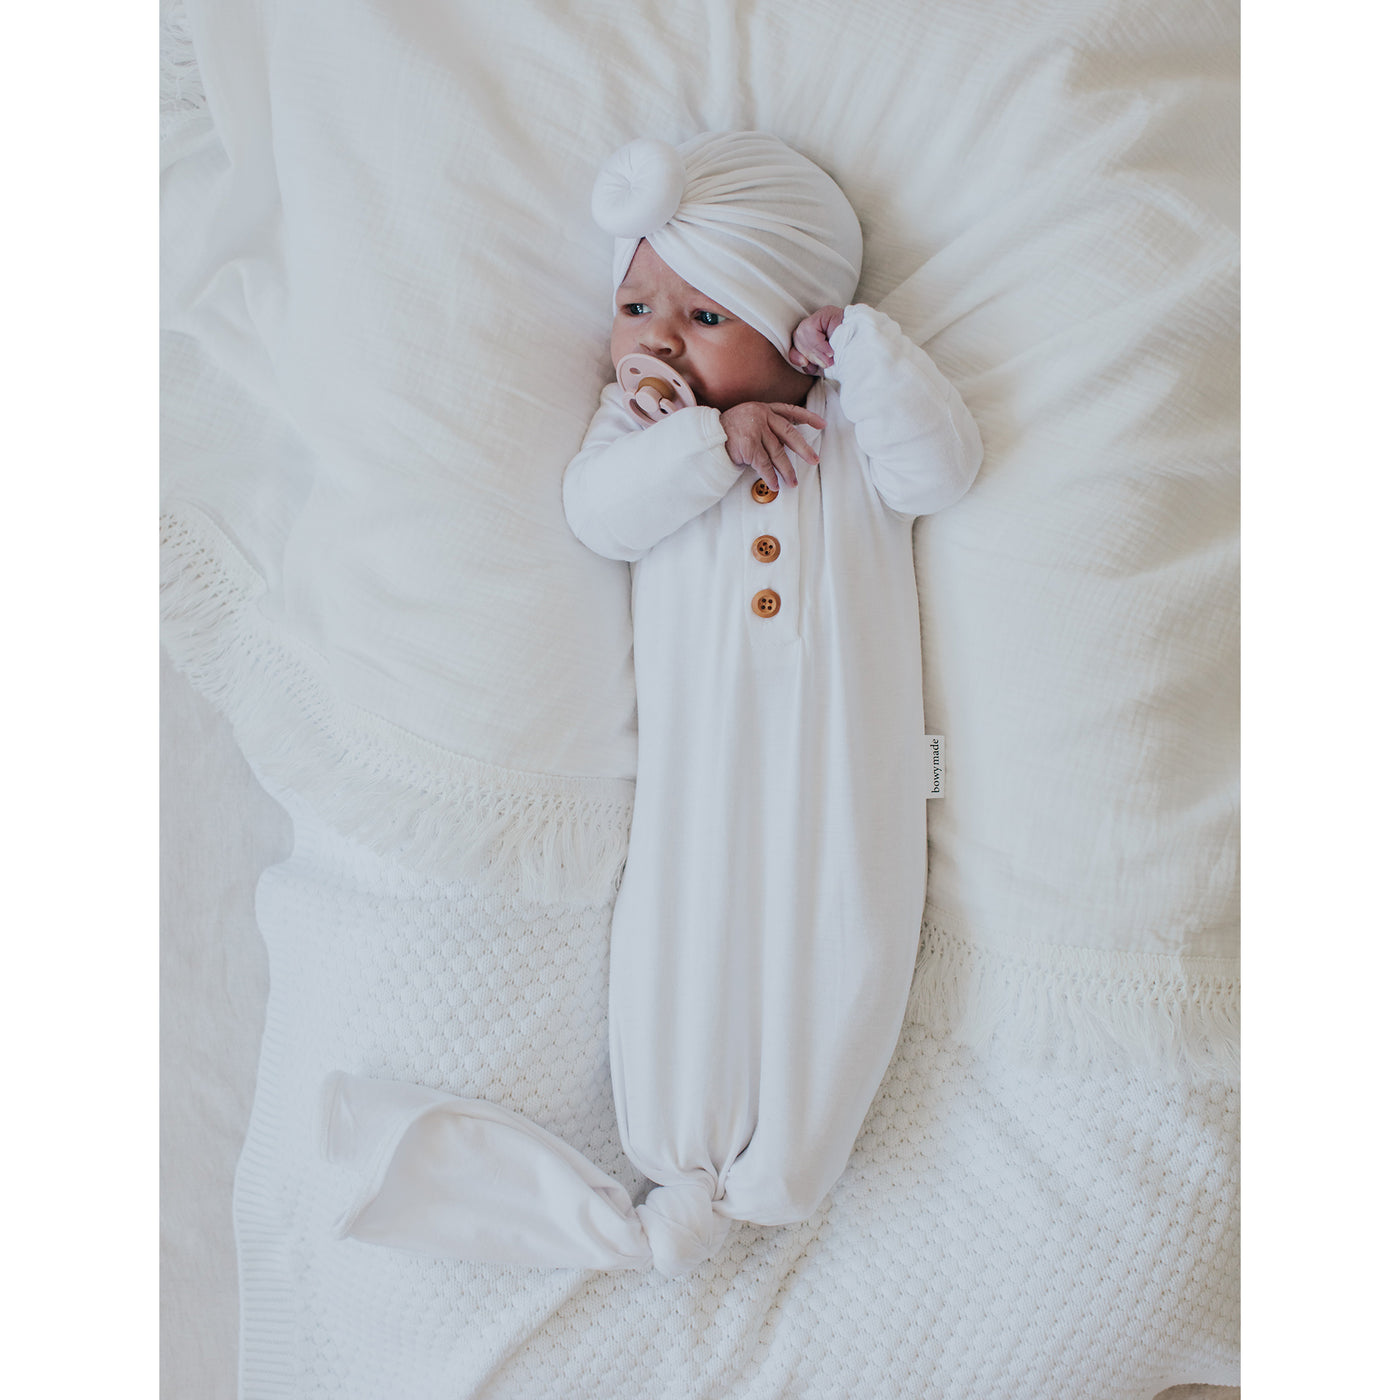 New born baby wearing white knotted gown on white sheets